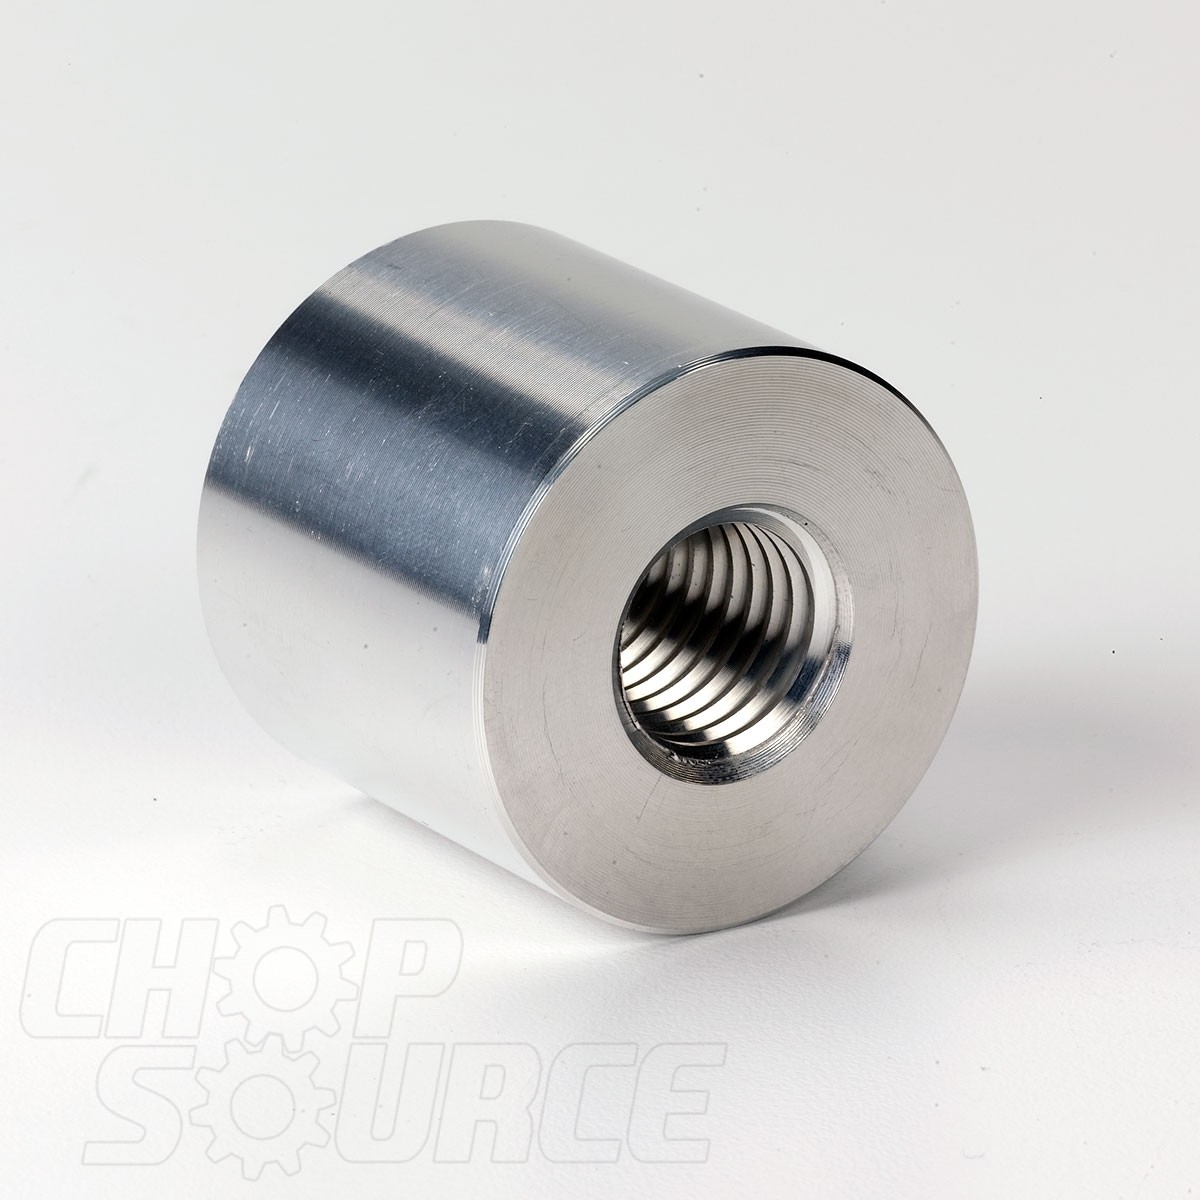 Threaded spacer for chop source frame jig neck fixture or head tube fixture